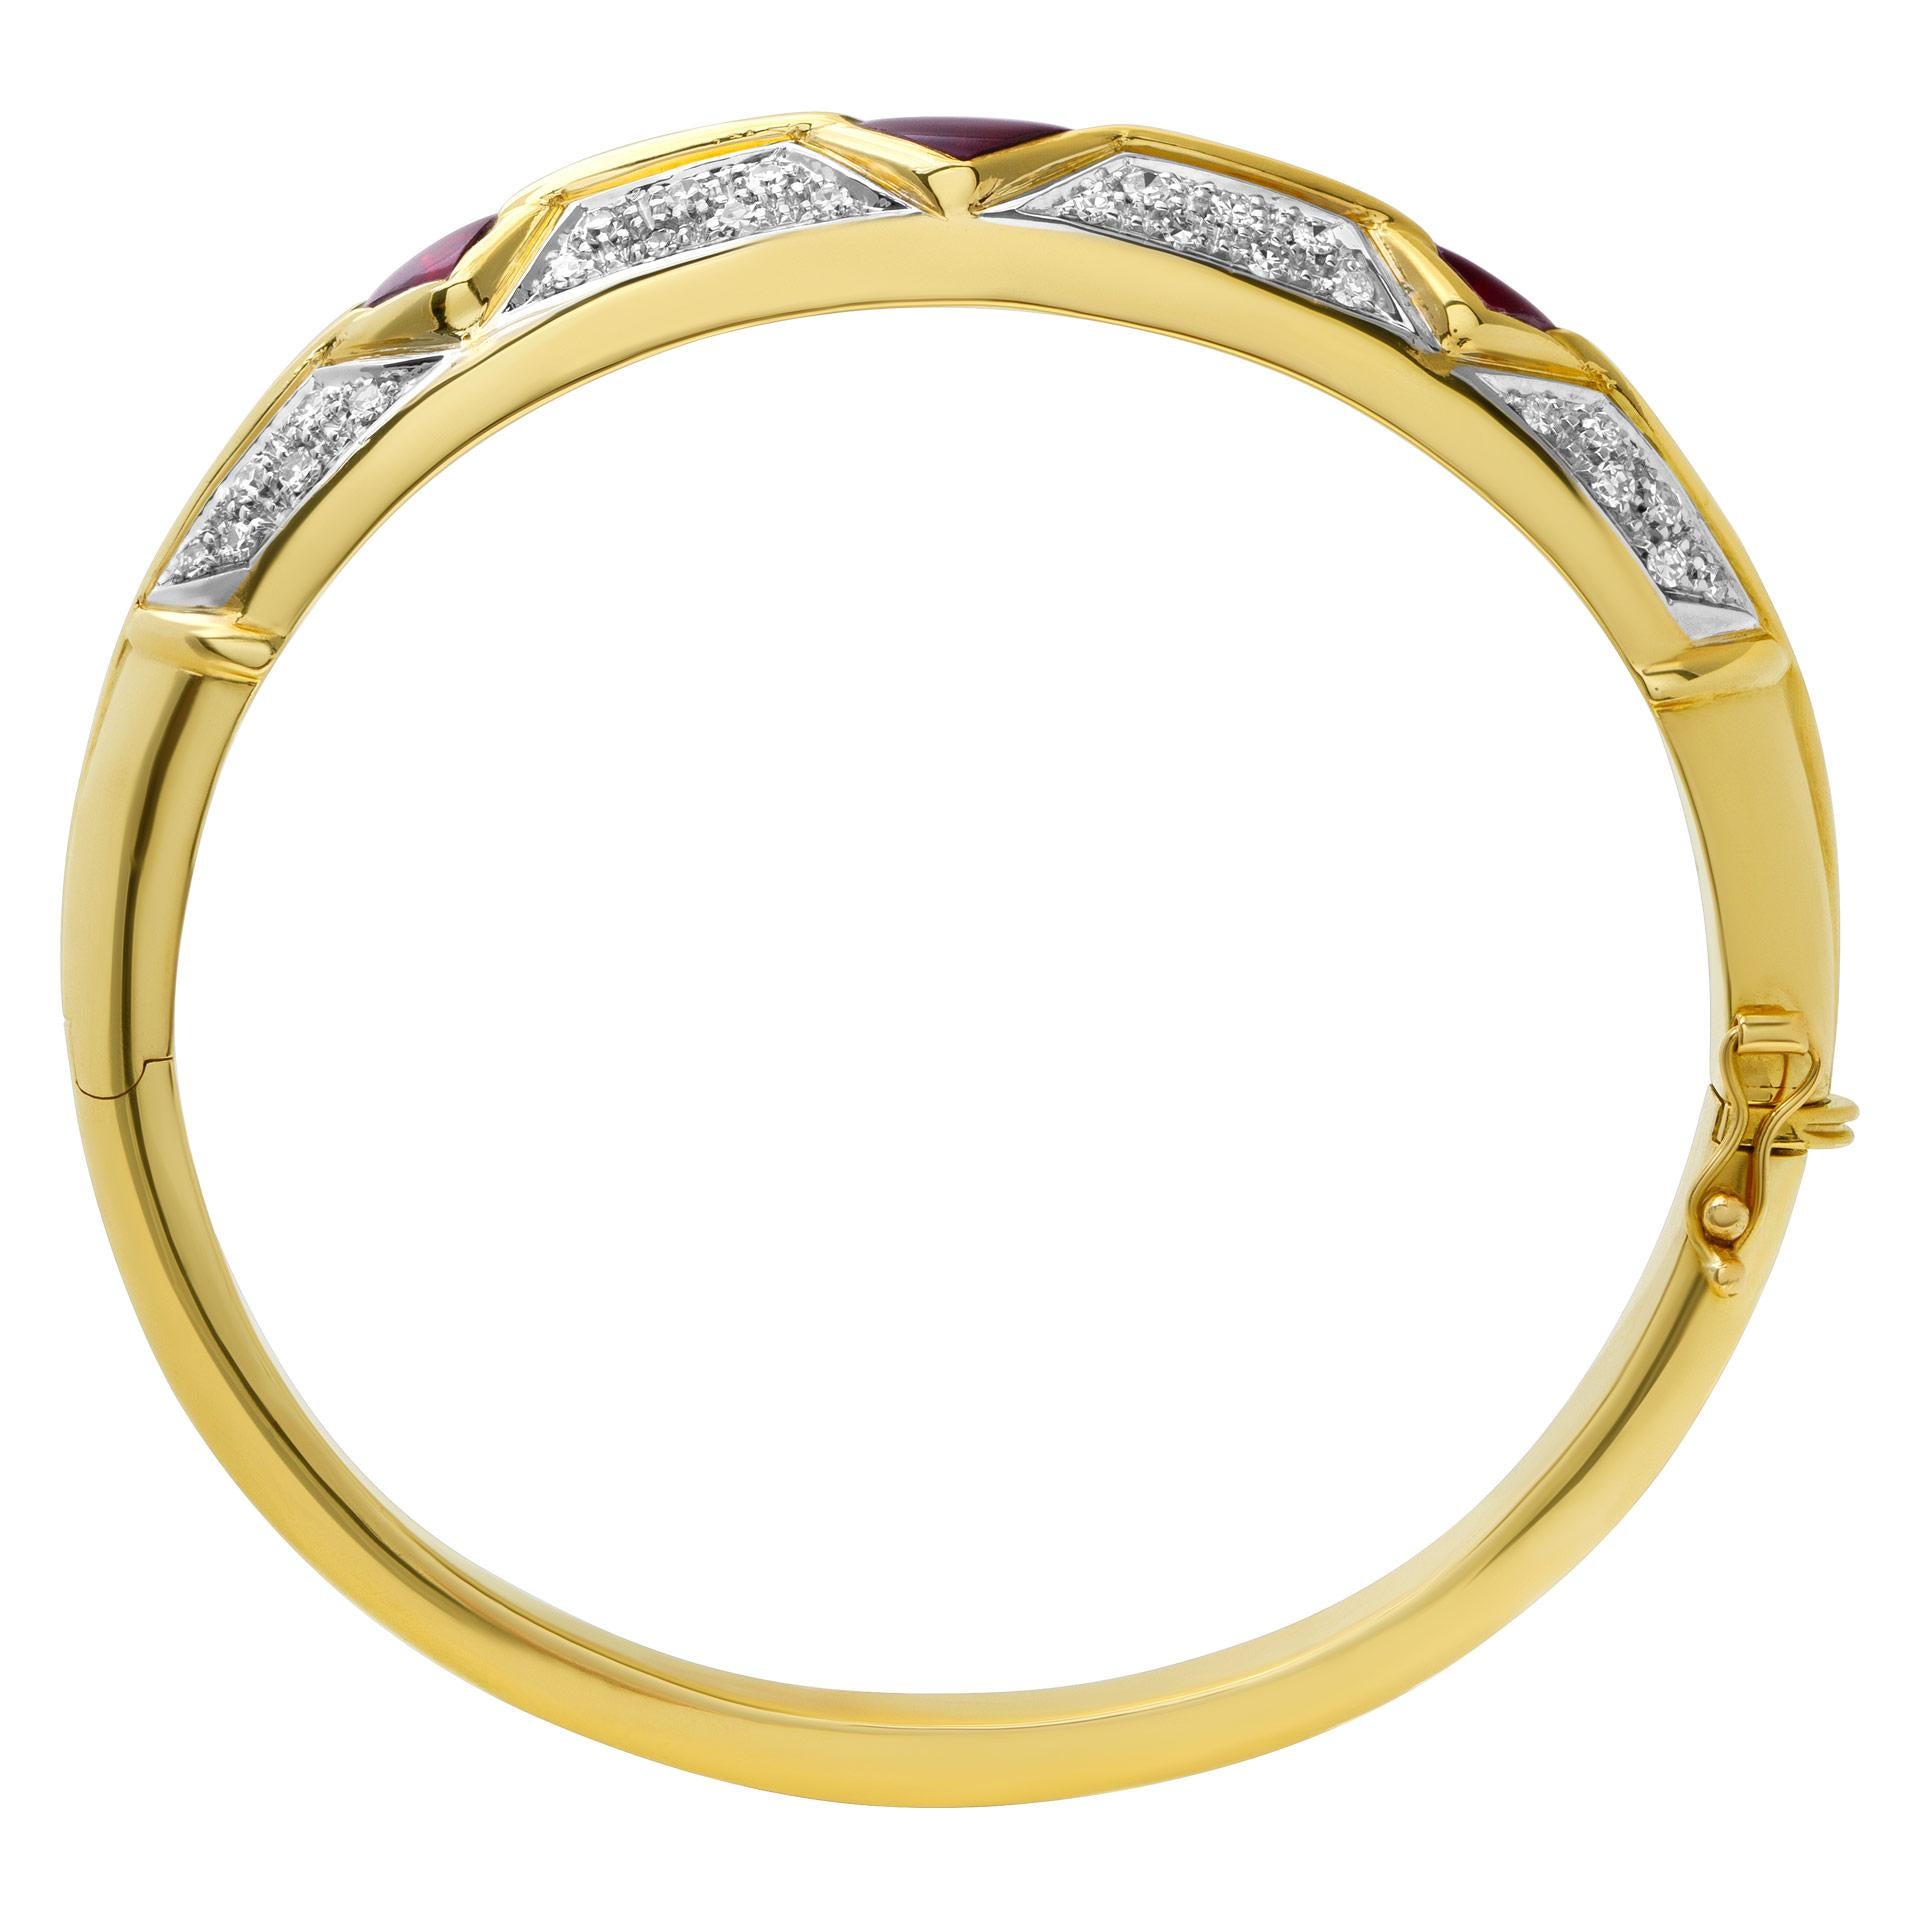 Diamond Bangle in 18k White and Yellow Gold with 1 Carat in Round Brilliant Cut For Sale 1